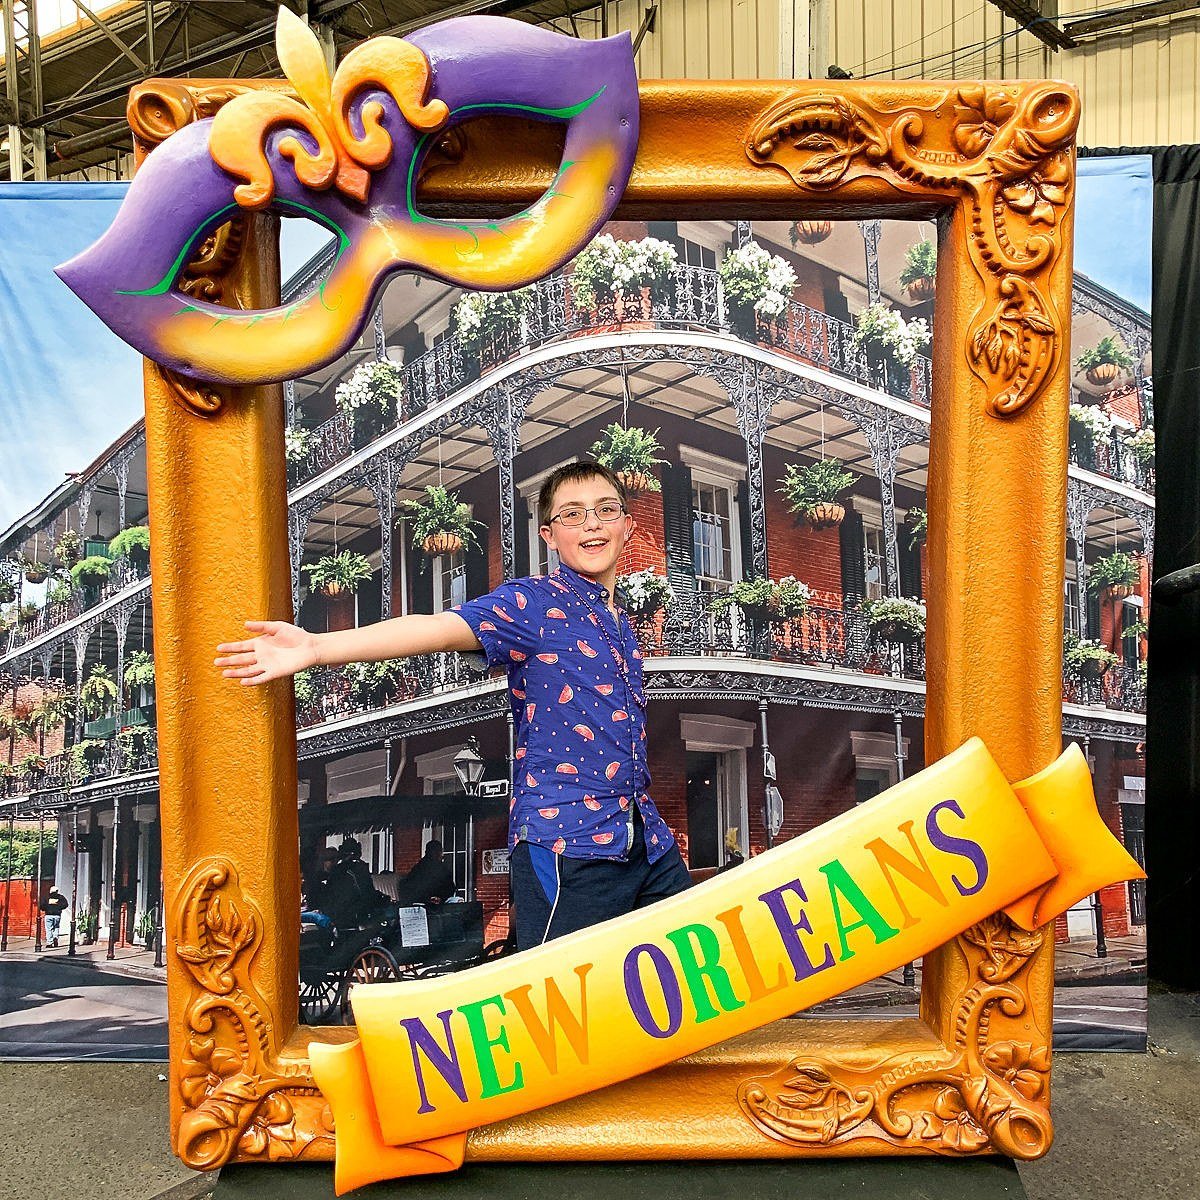 Mardi Gras World in New Orleans with kids